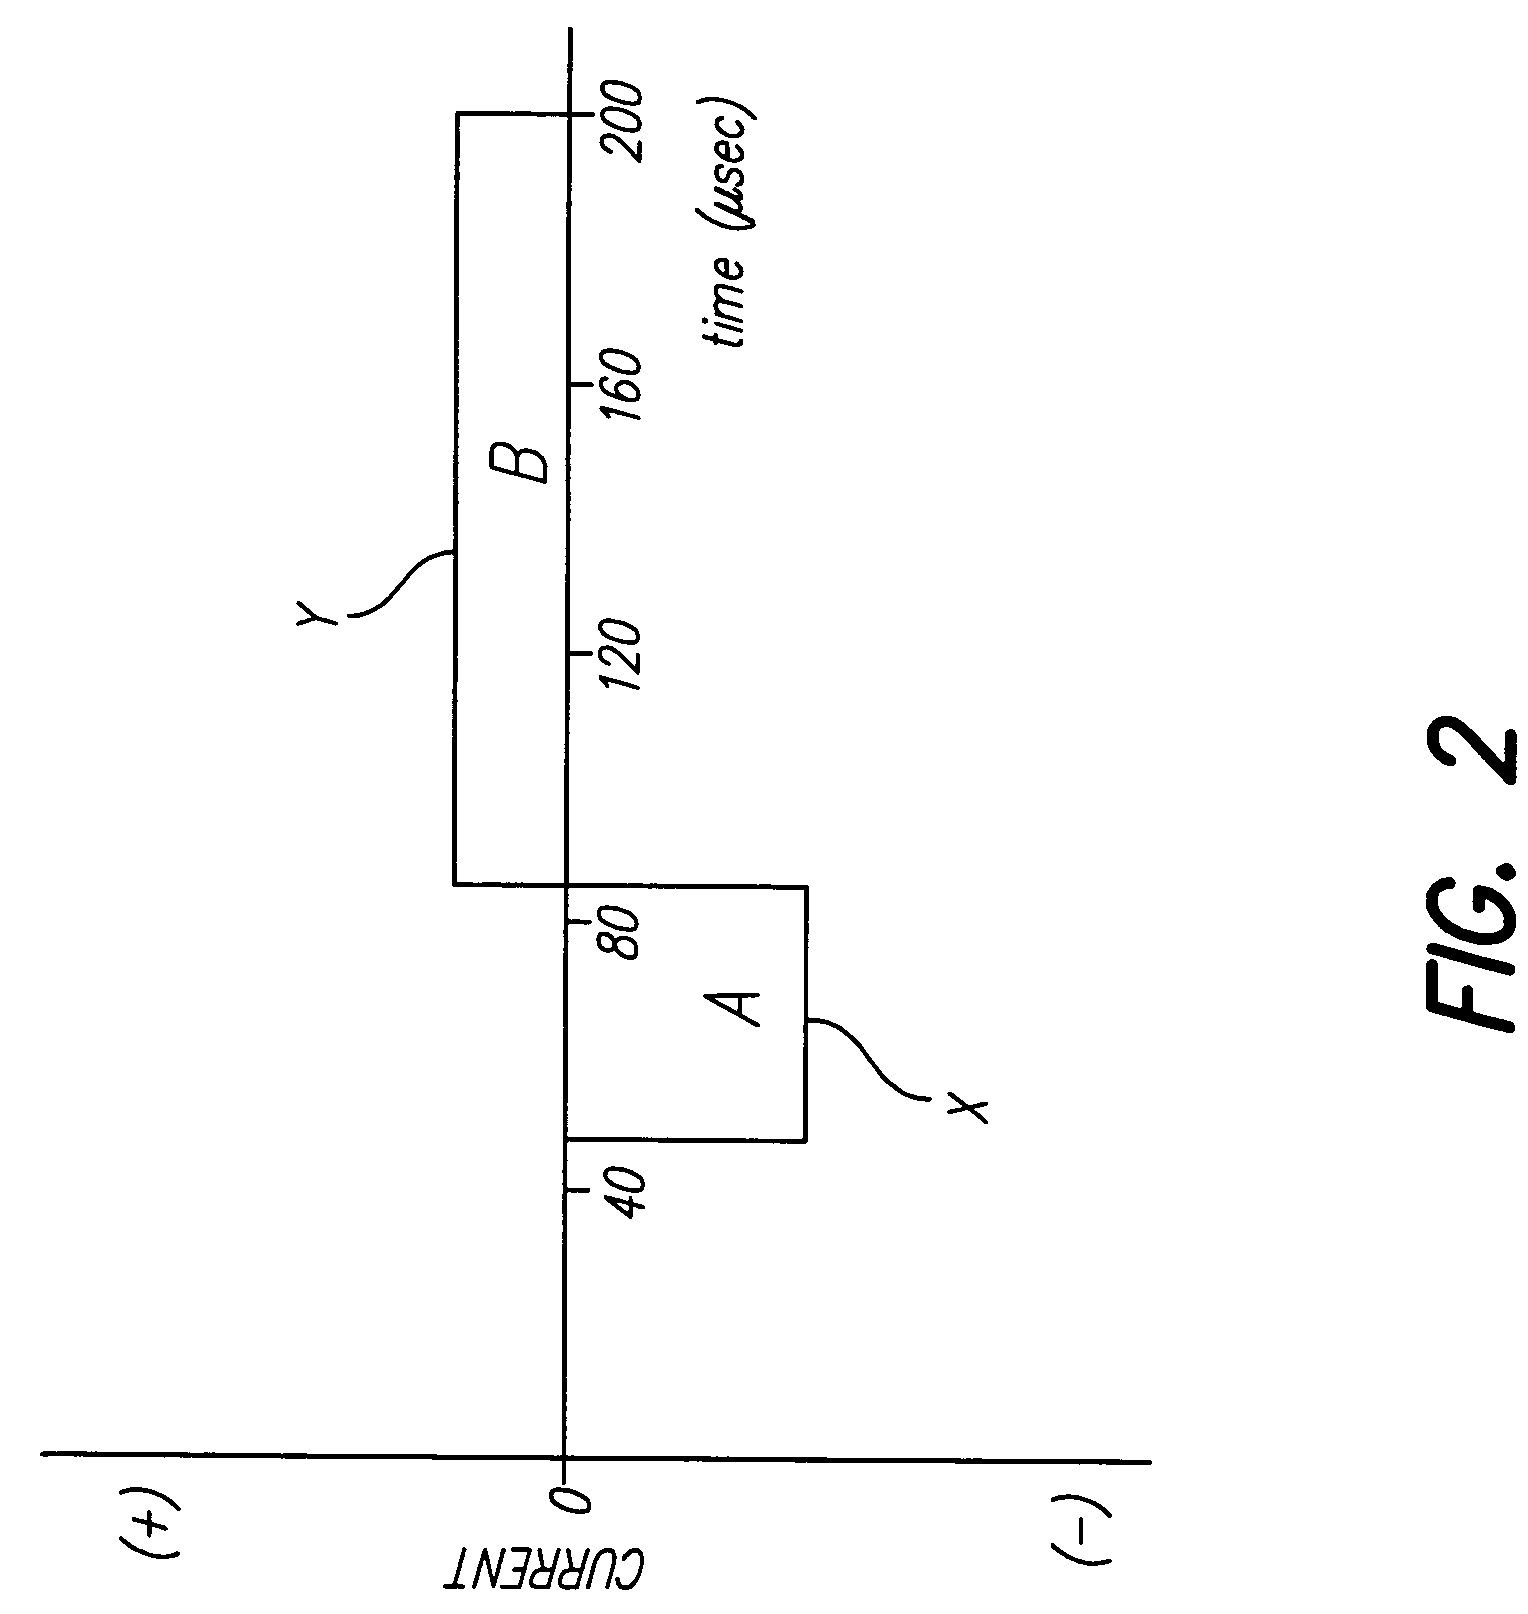 System and method for using a multi-contact electrode to stimulate the cochlear nerve or other body tissue